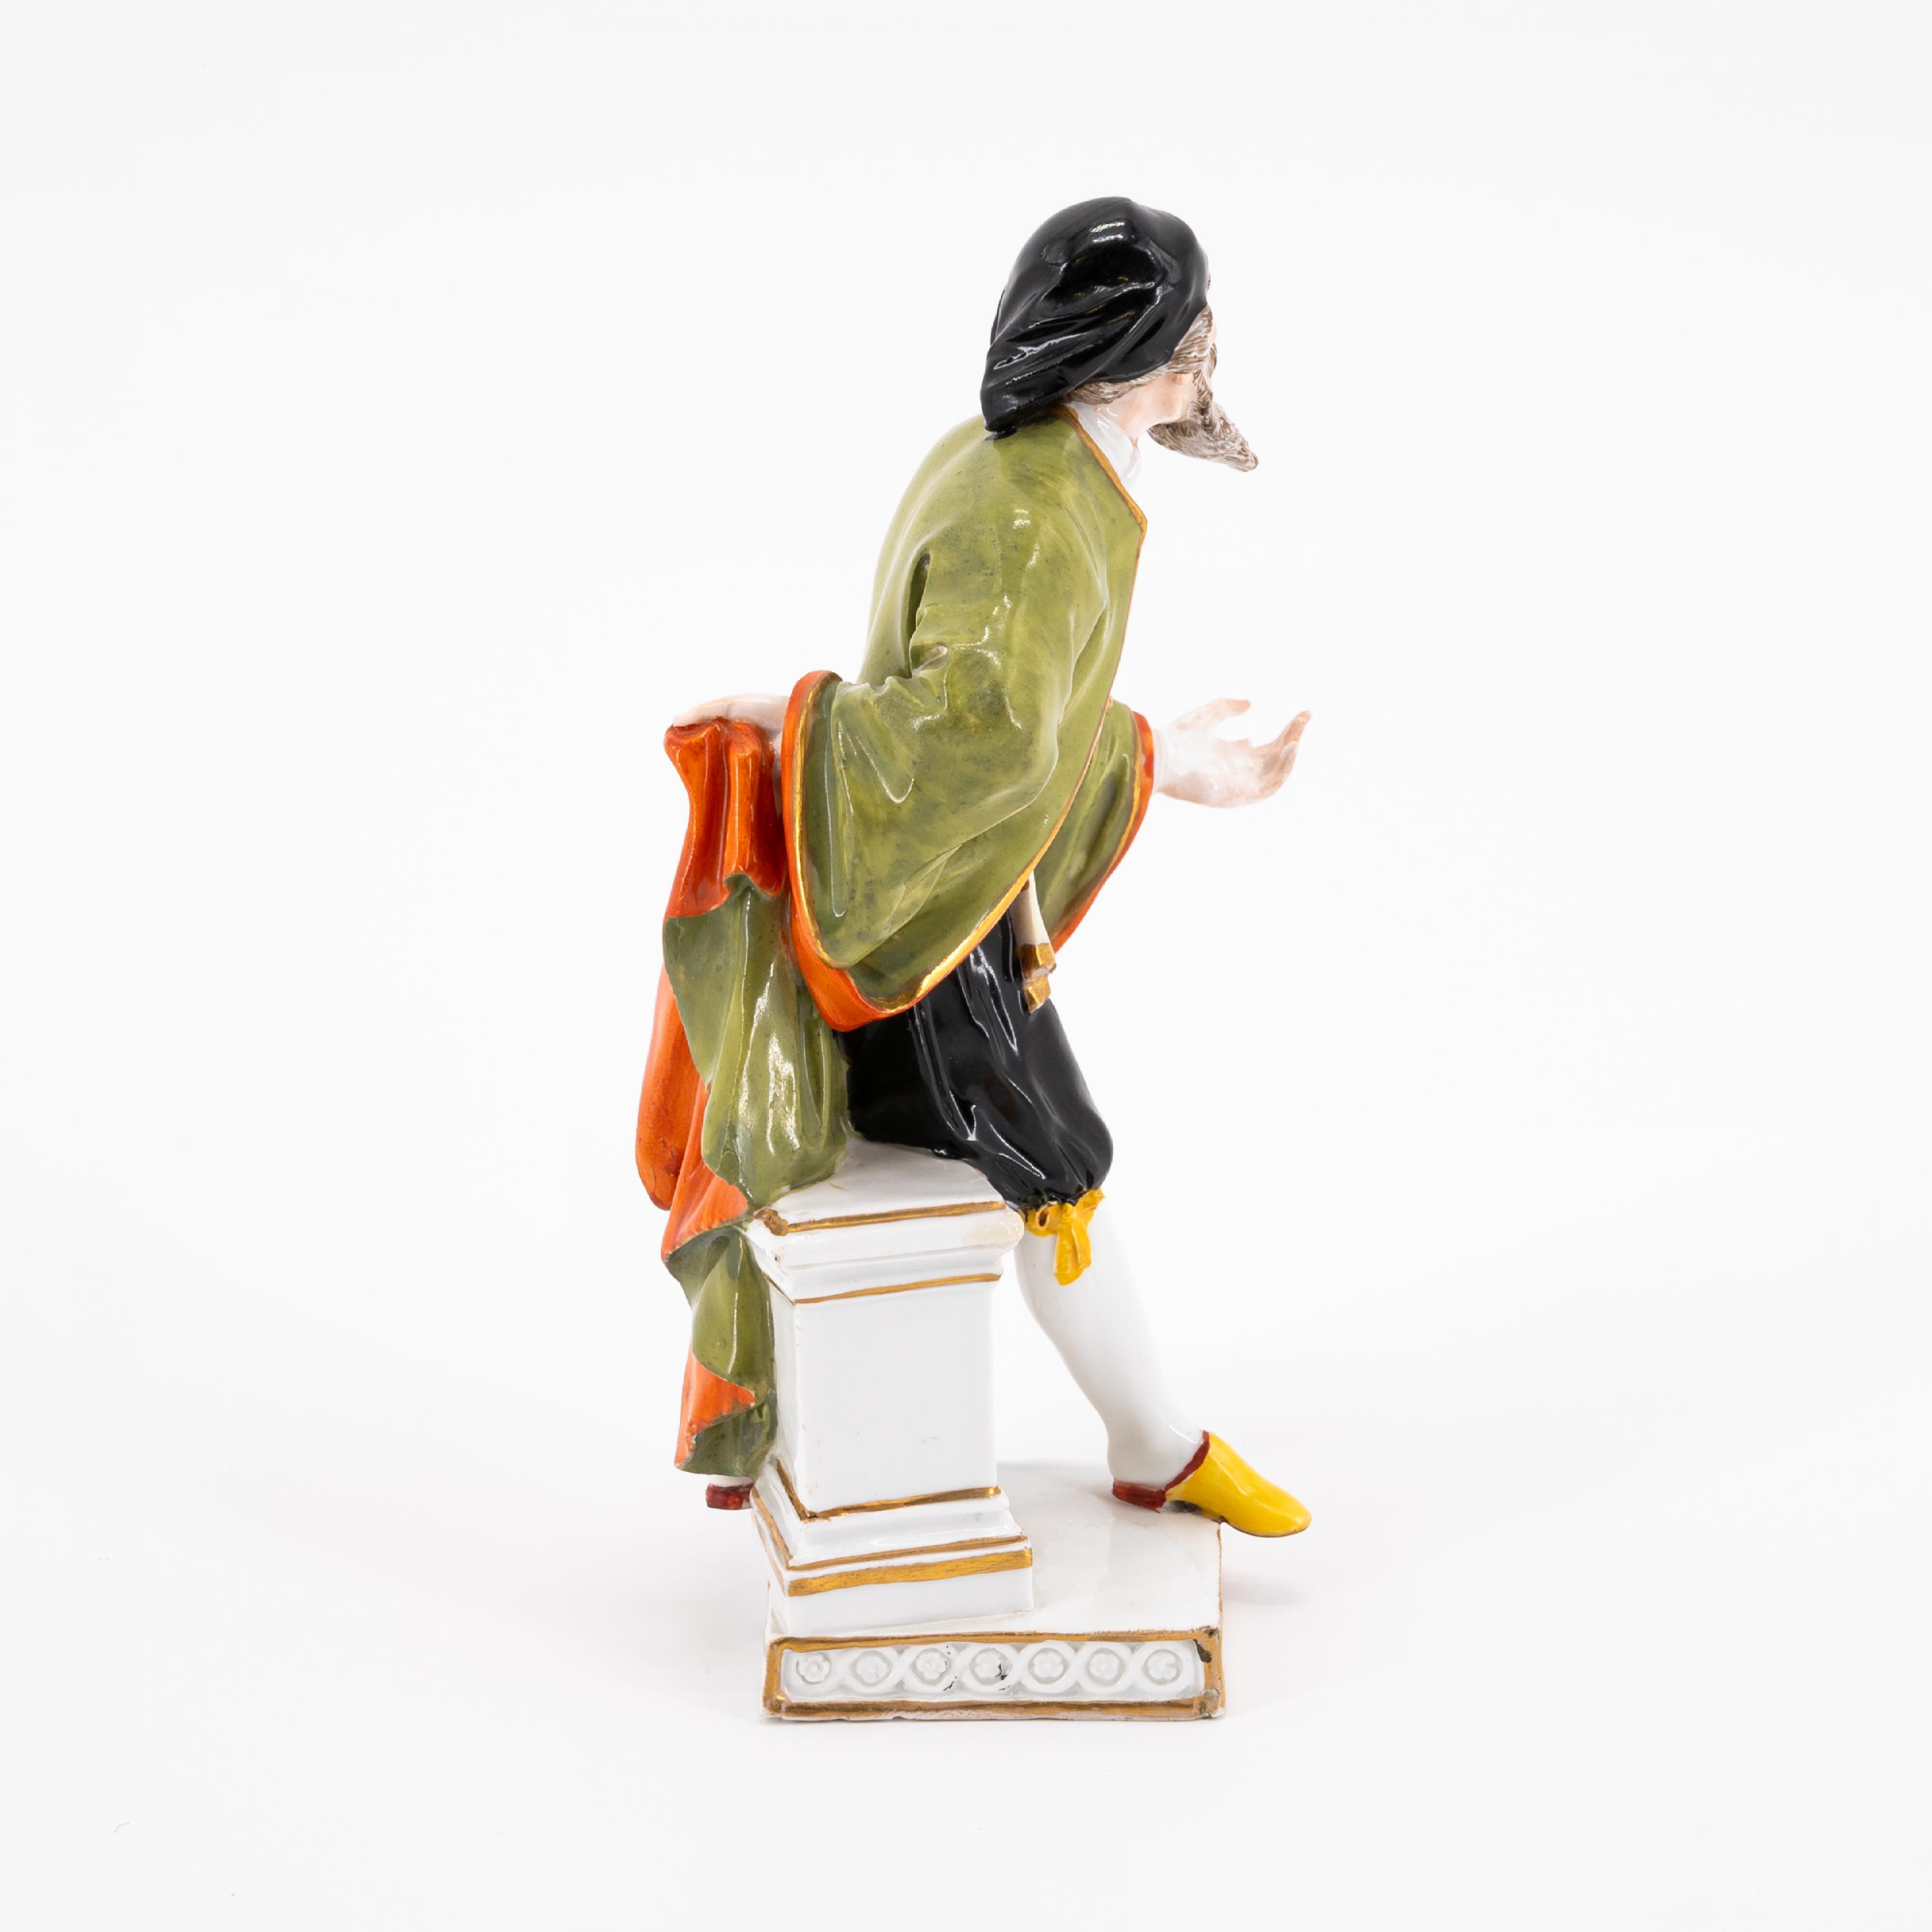 PORCELAIN PANTALONE FROM THE COMMEDIA DELL'ARTE - Image 4 of 5